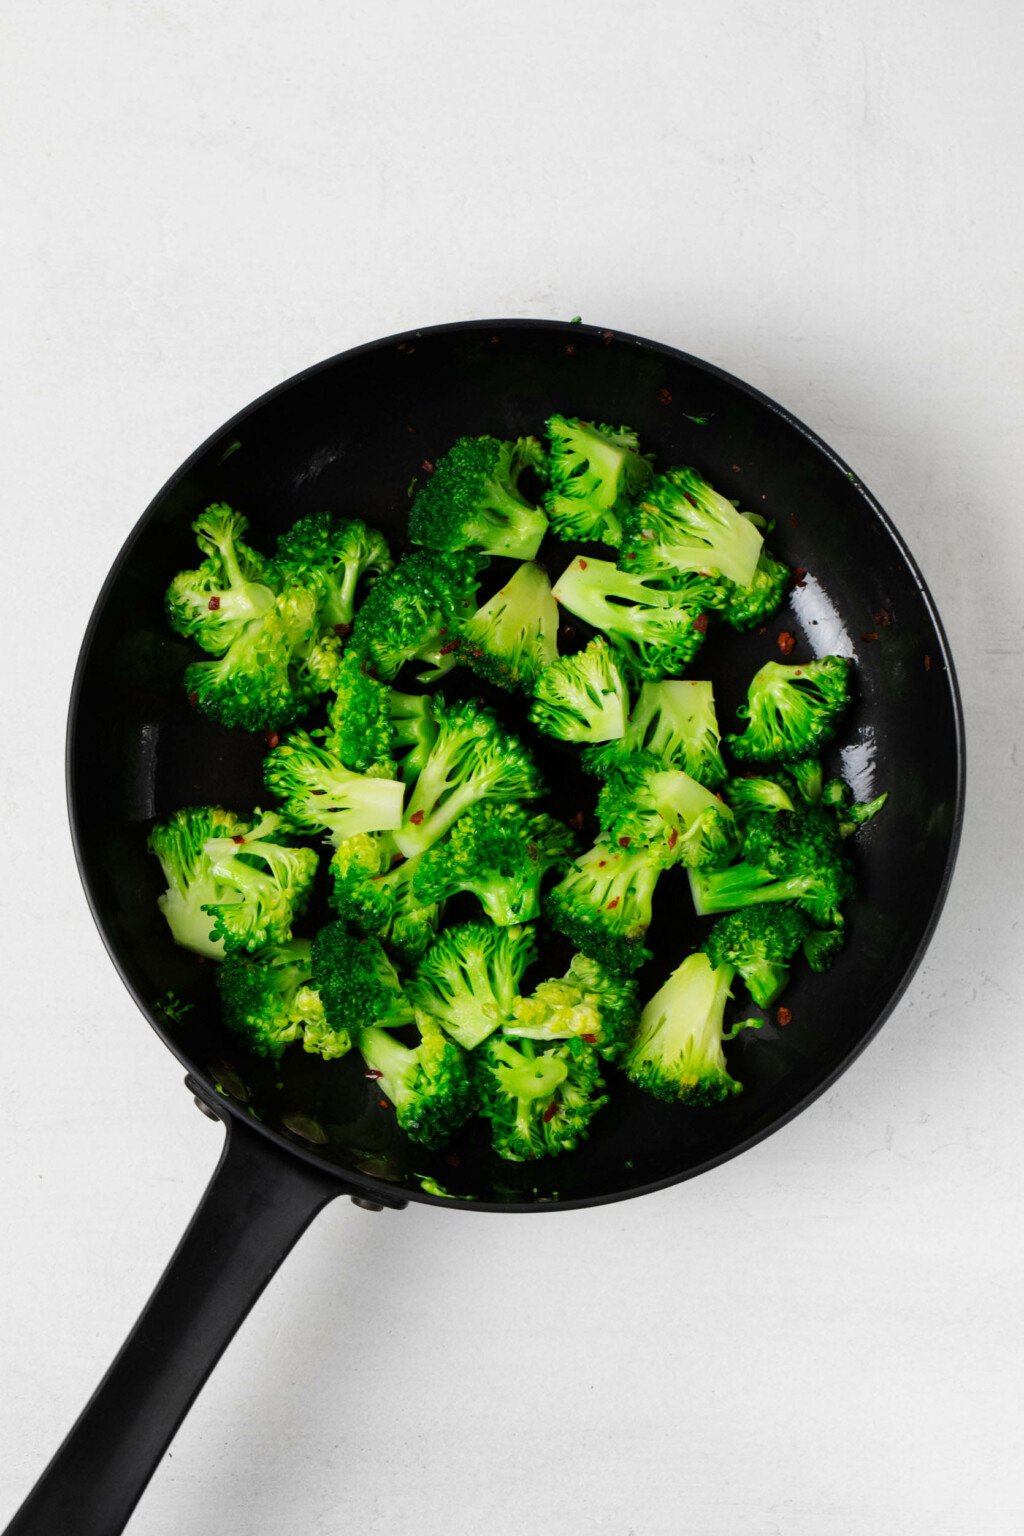 Broccoli florets are being cooked in a cast iron skillet.